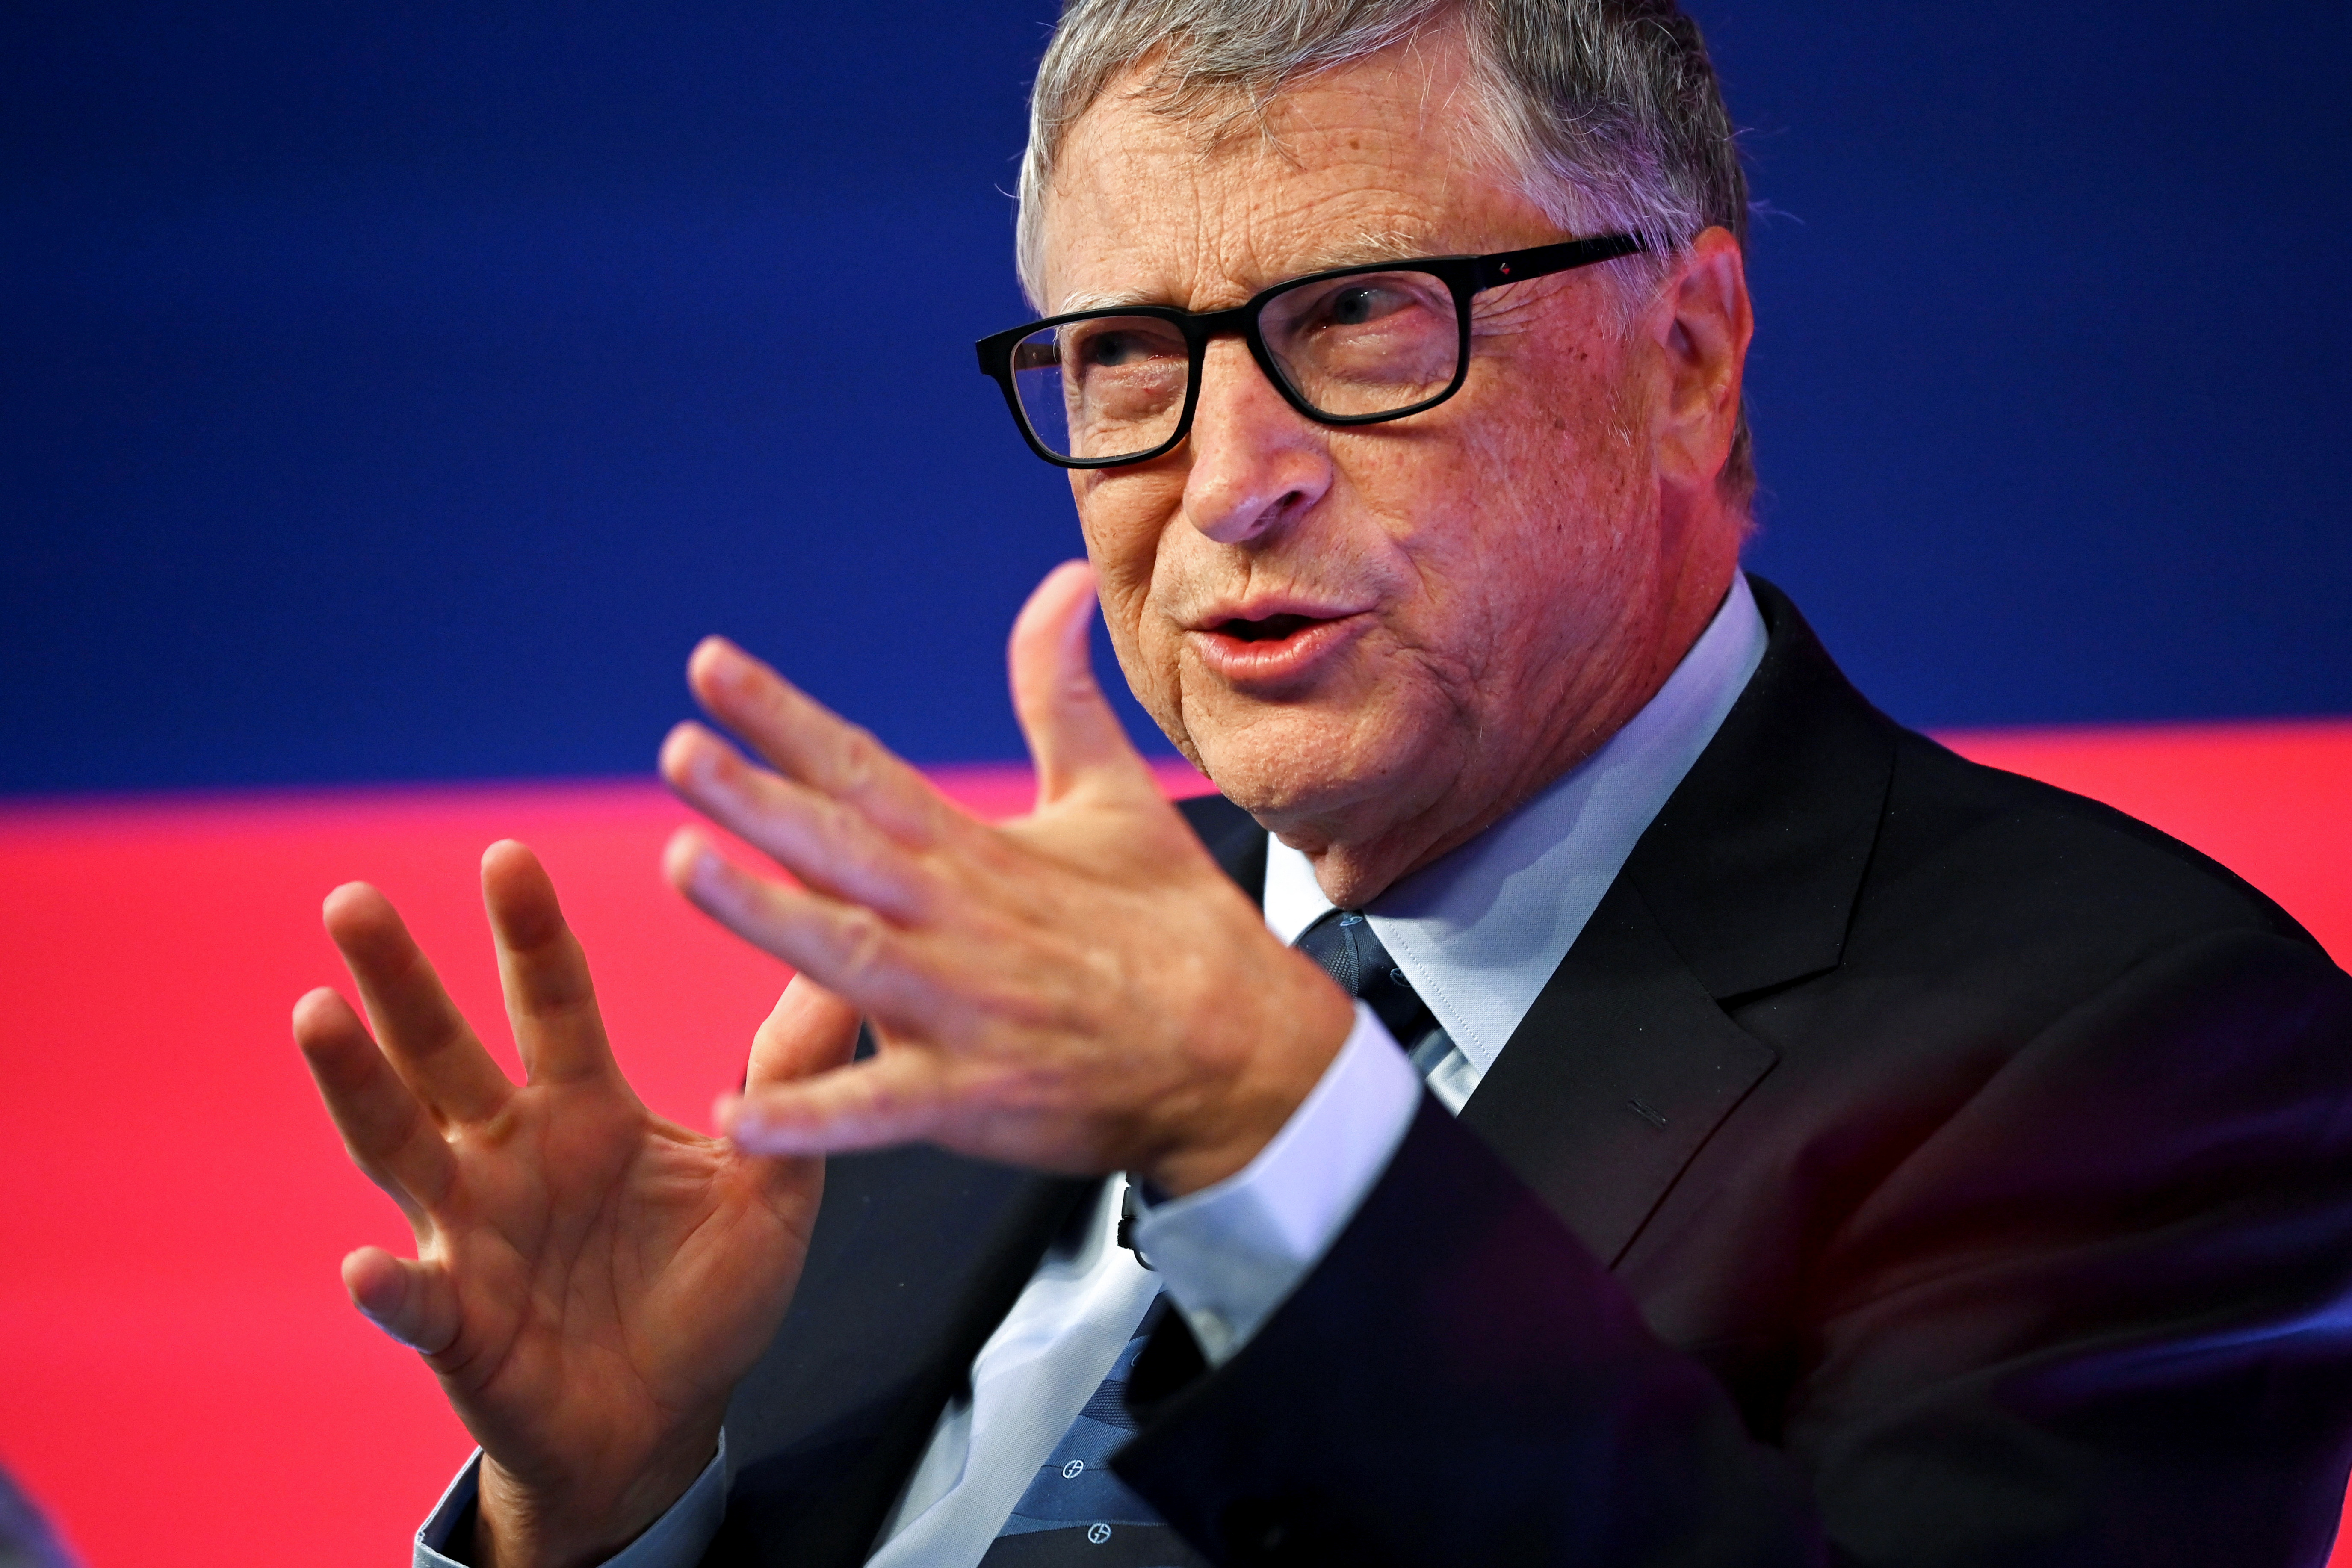 Bill Gates speaks during the Global Investment Summit at the Science Museum, in London, Britain, October 19, 2021. Leon Neal/Pool via REUTERS